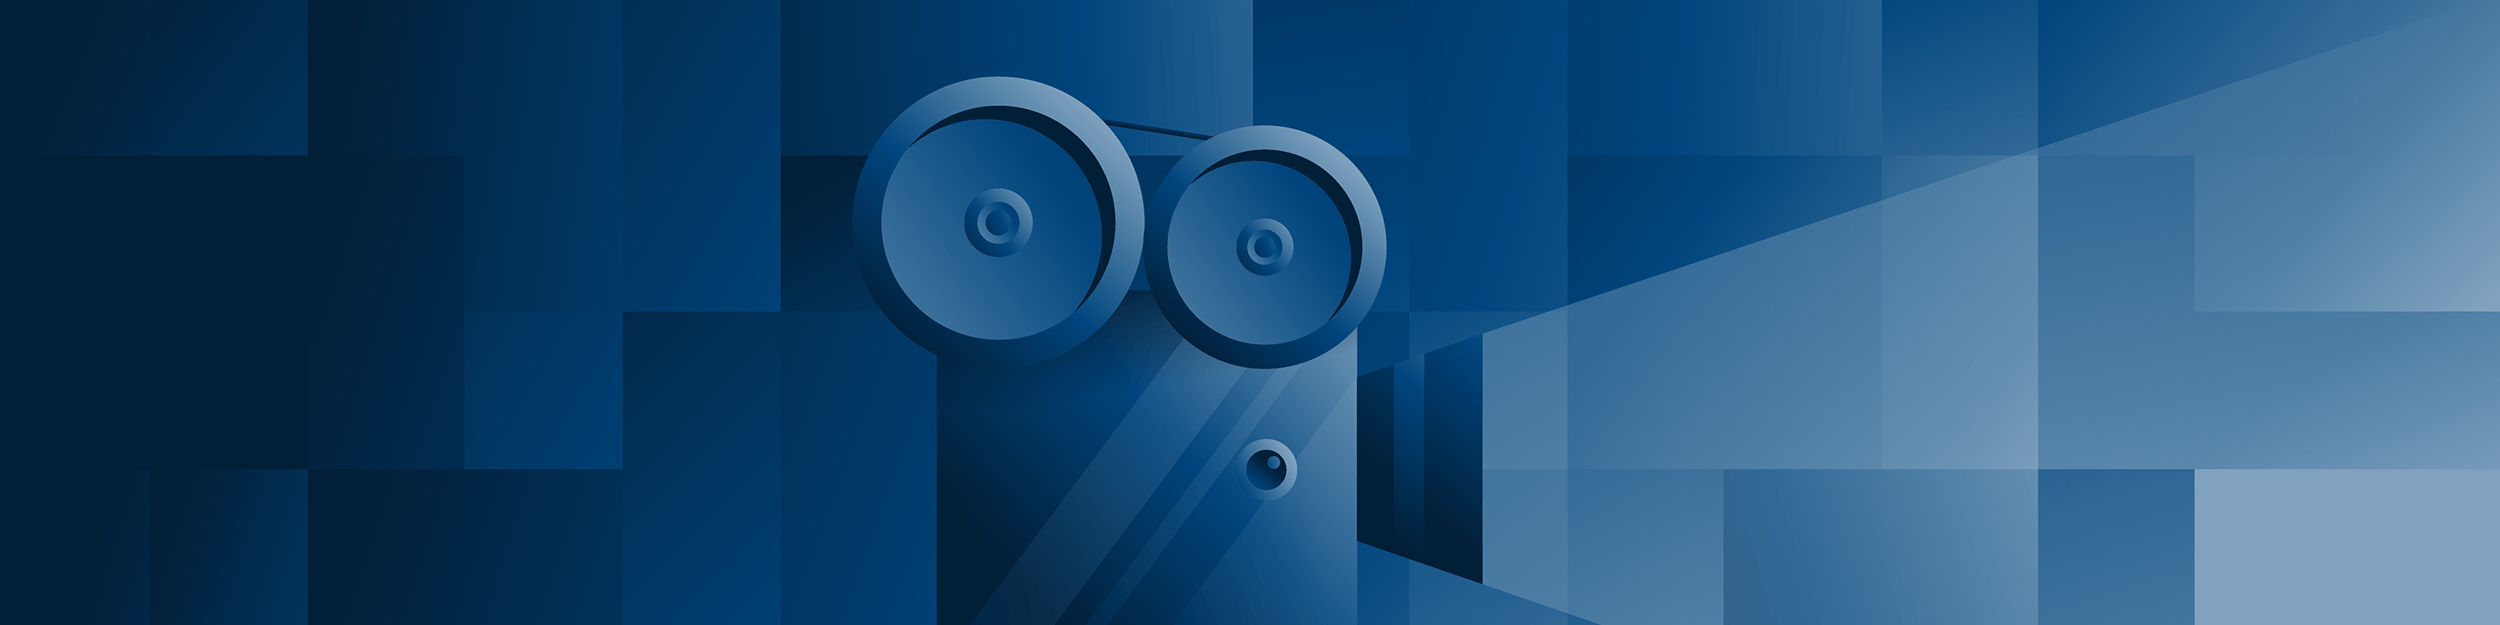 projector-2500px-e1556815986119-1.png